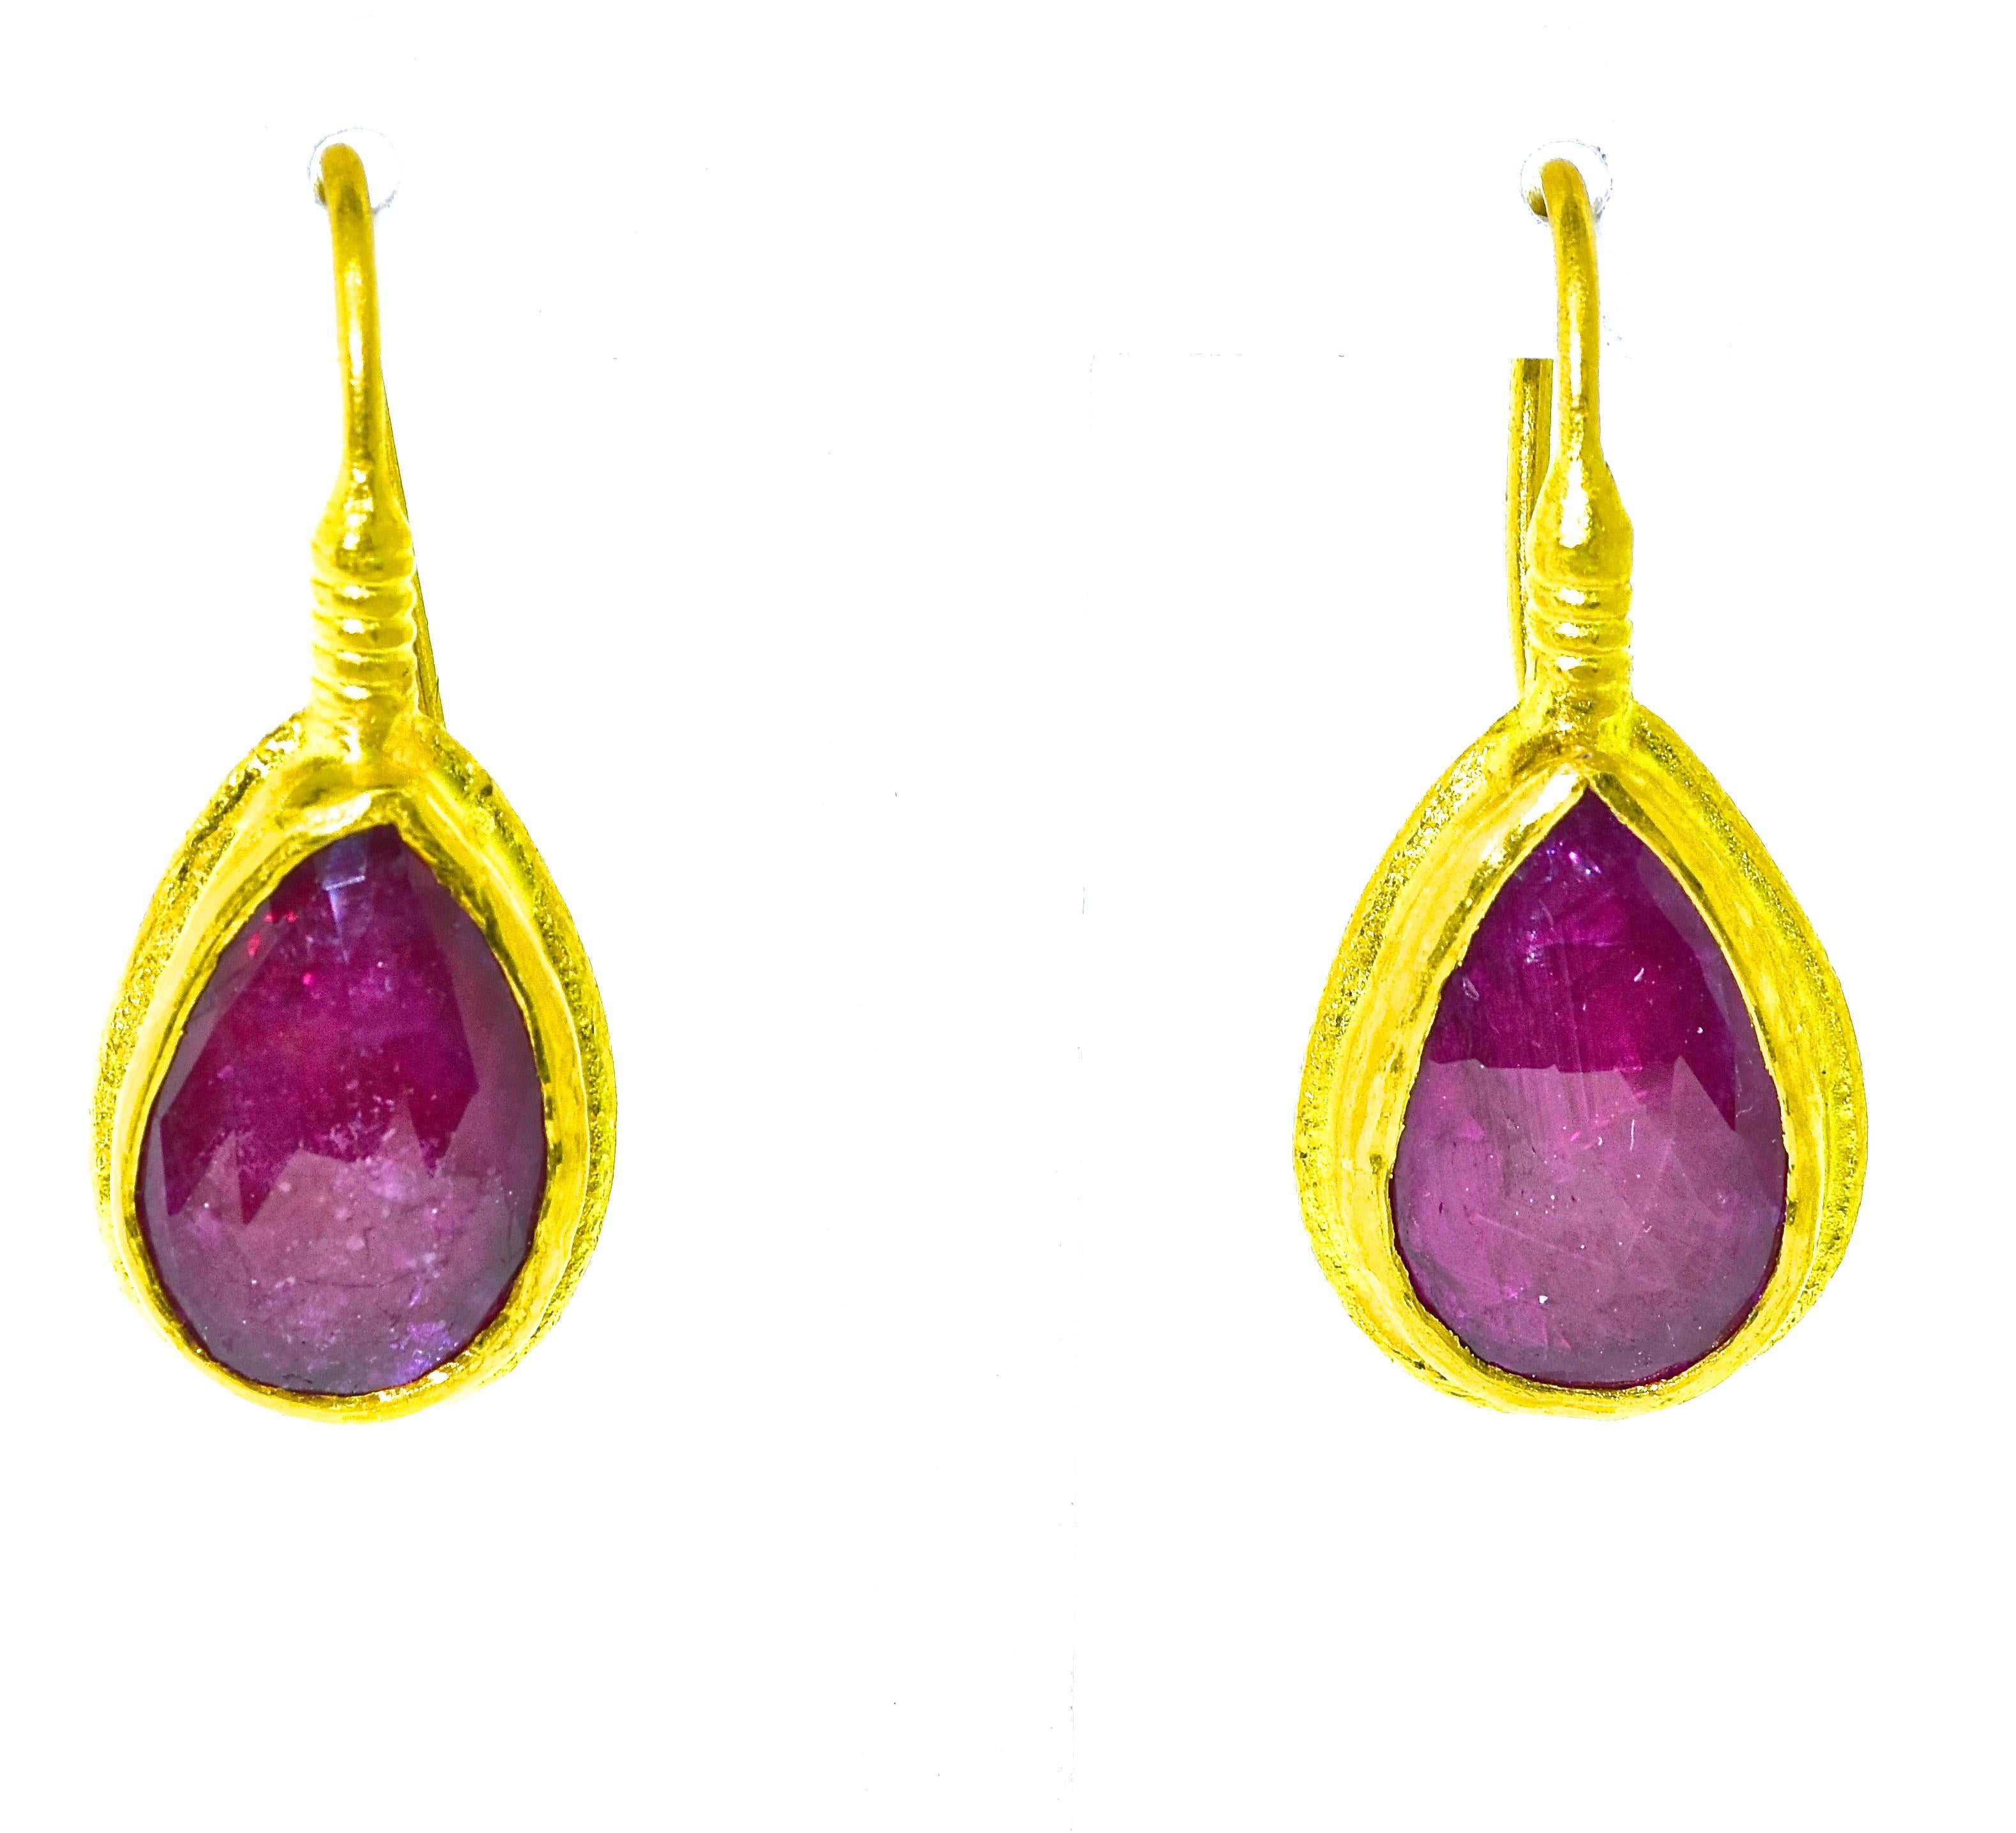 Natural rubies weighing approximately 3.0 cts, set in 23K gold.  These earrings weigh 3 dwt., are 1 inch in length and signed on the back by ARA and 985 which is for the gold karat.  Contemporary and new these earrings are easy to wear, they have a